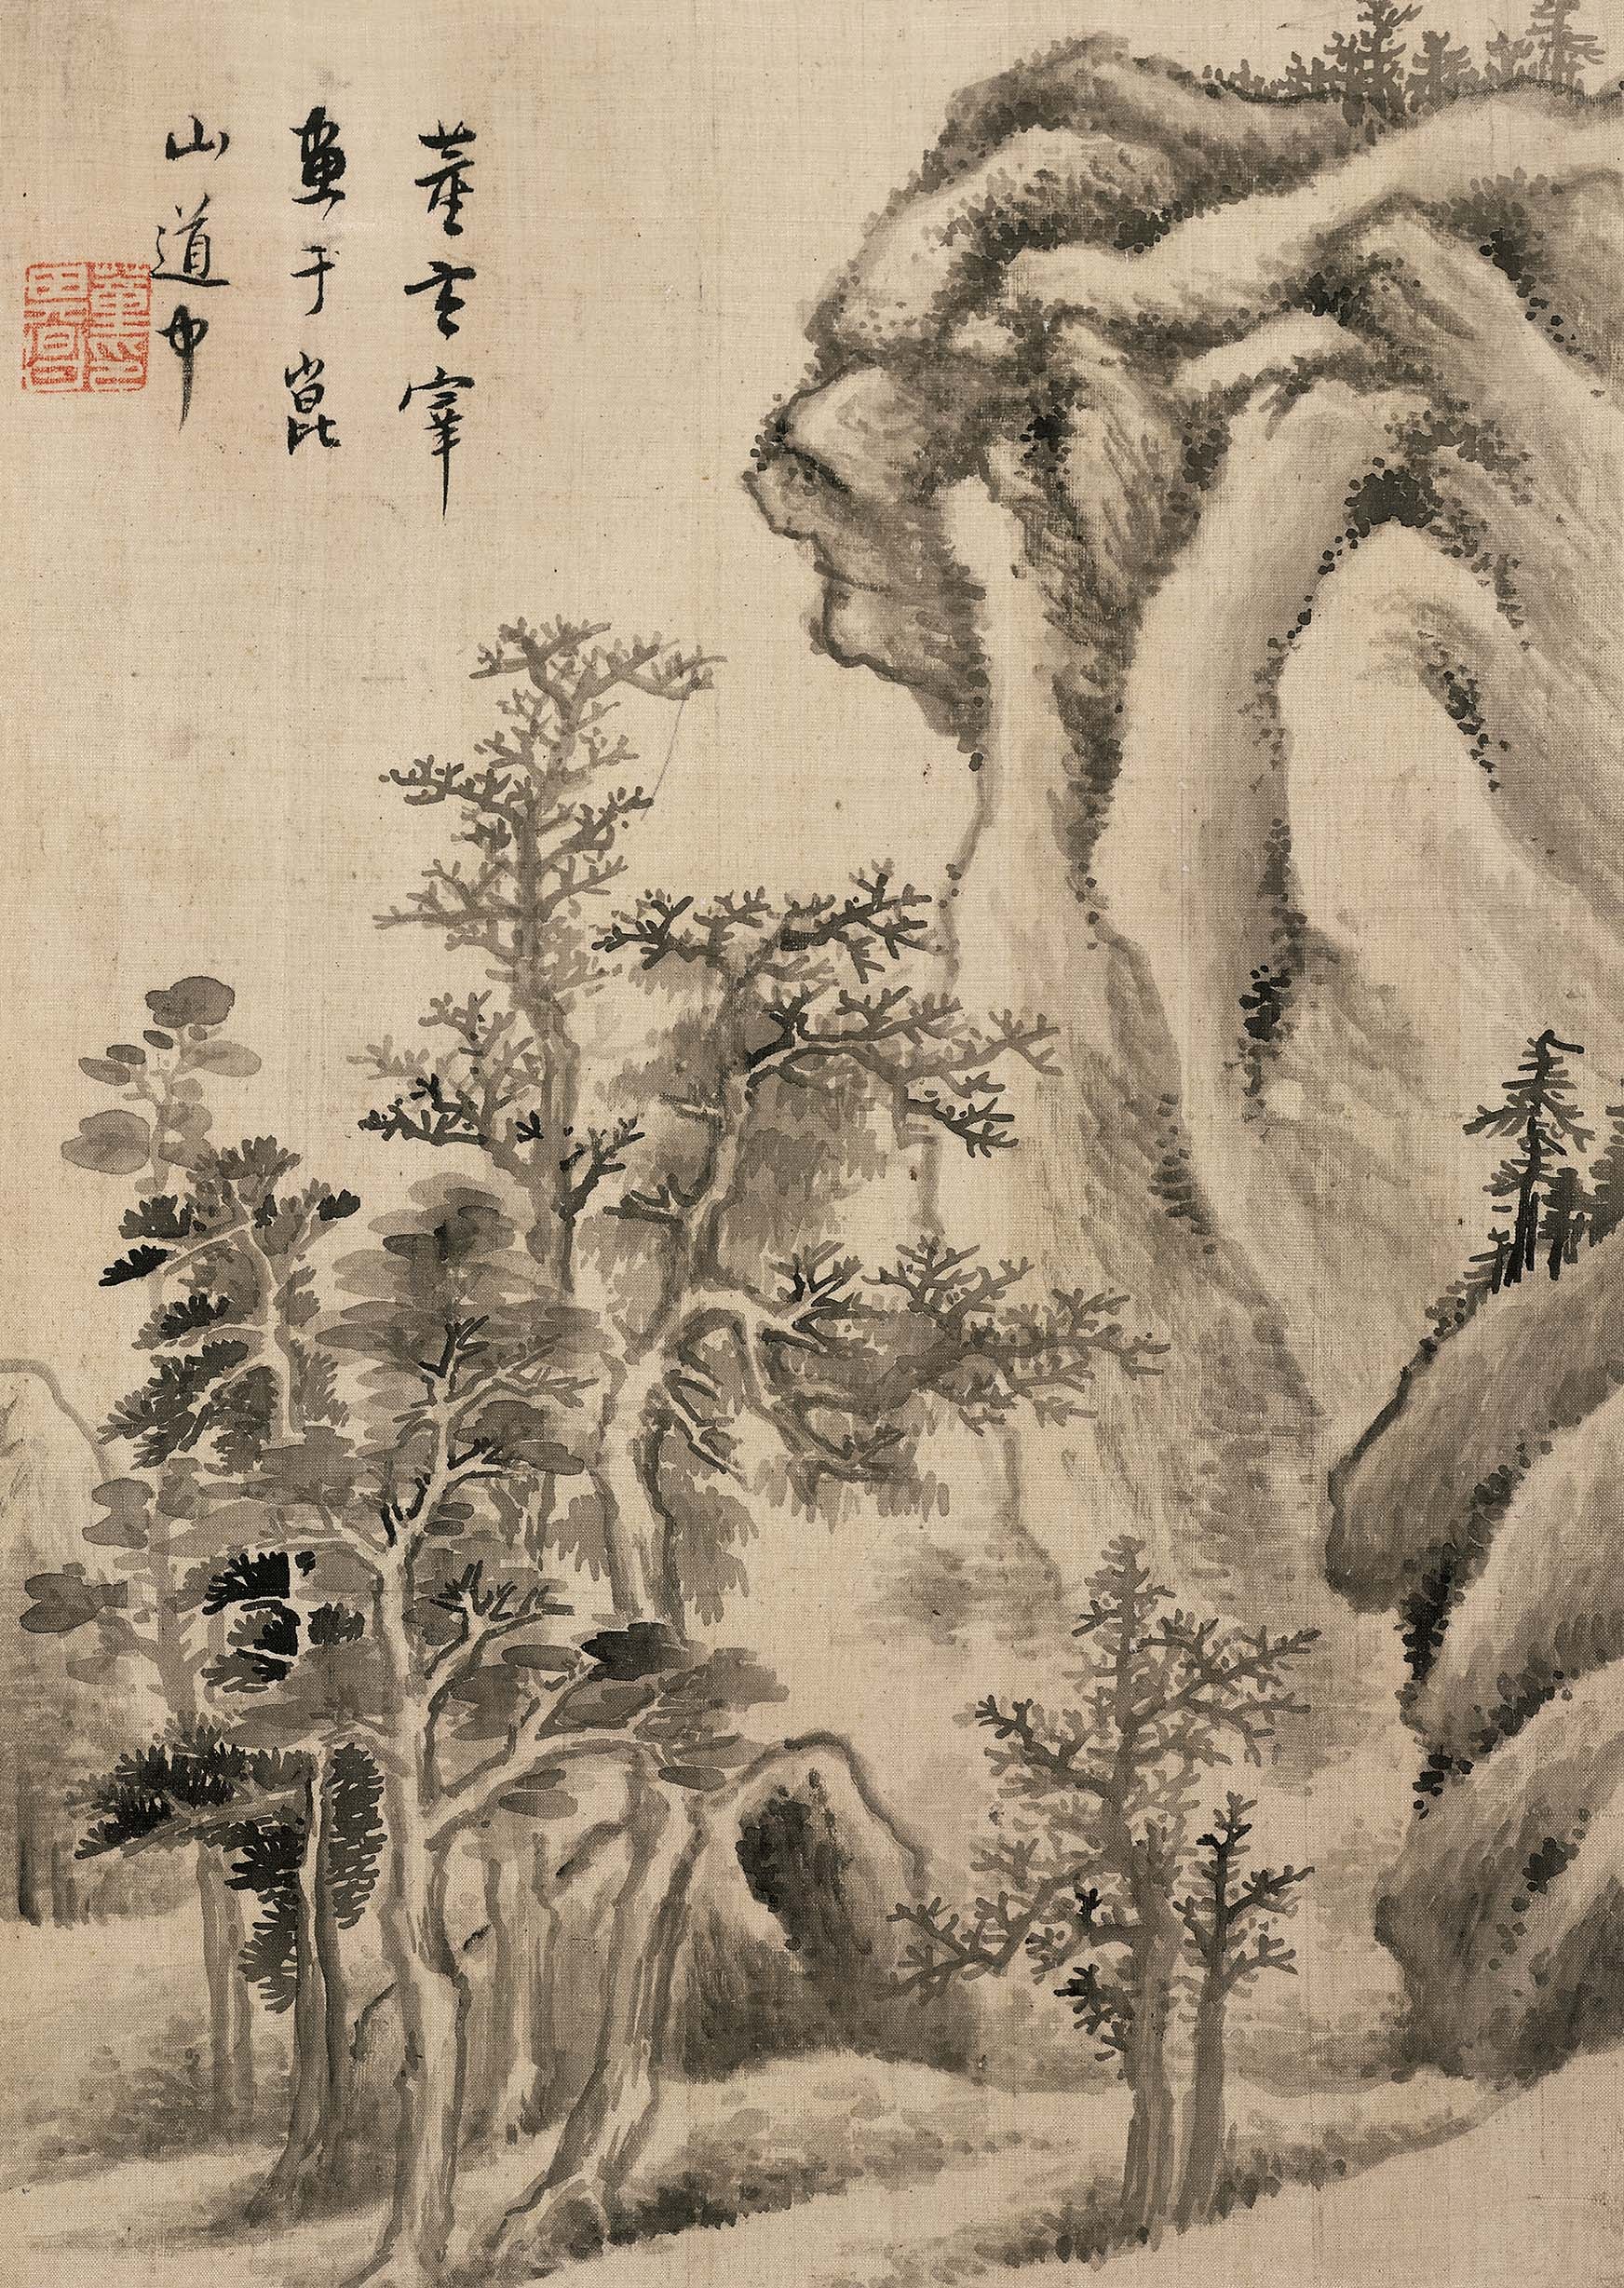 Chinese Antique Art Painting 明 董其昌 山水图册 Ming Dong Qichang Shan Shi Tu Landscape China Ancient Wall Picture Ideas 2088-Chinese Style Finds™